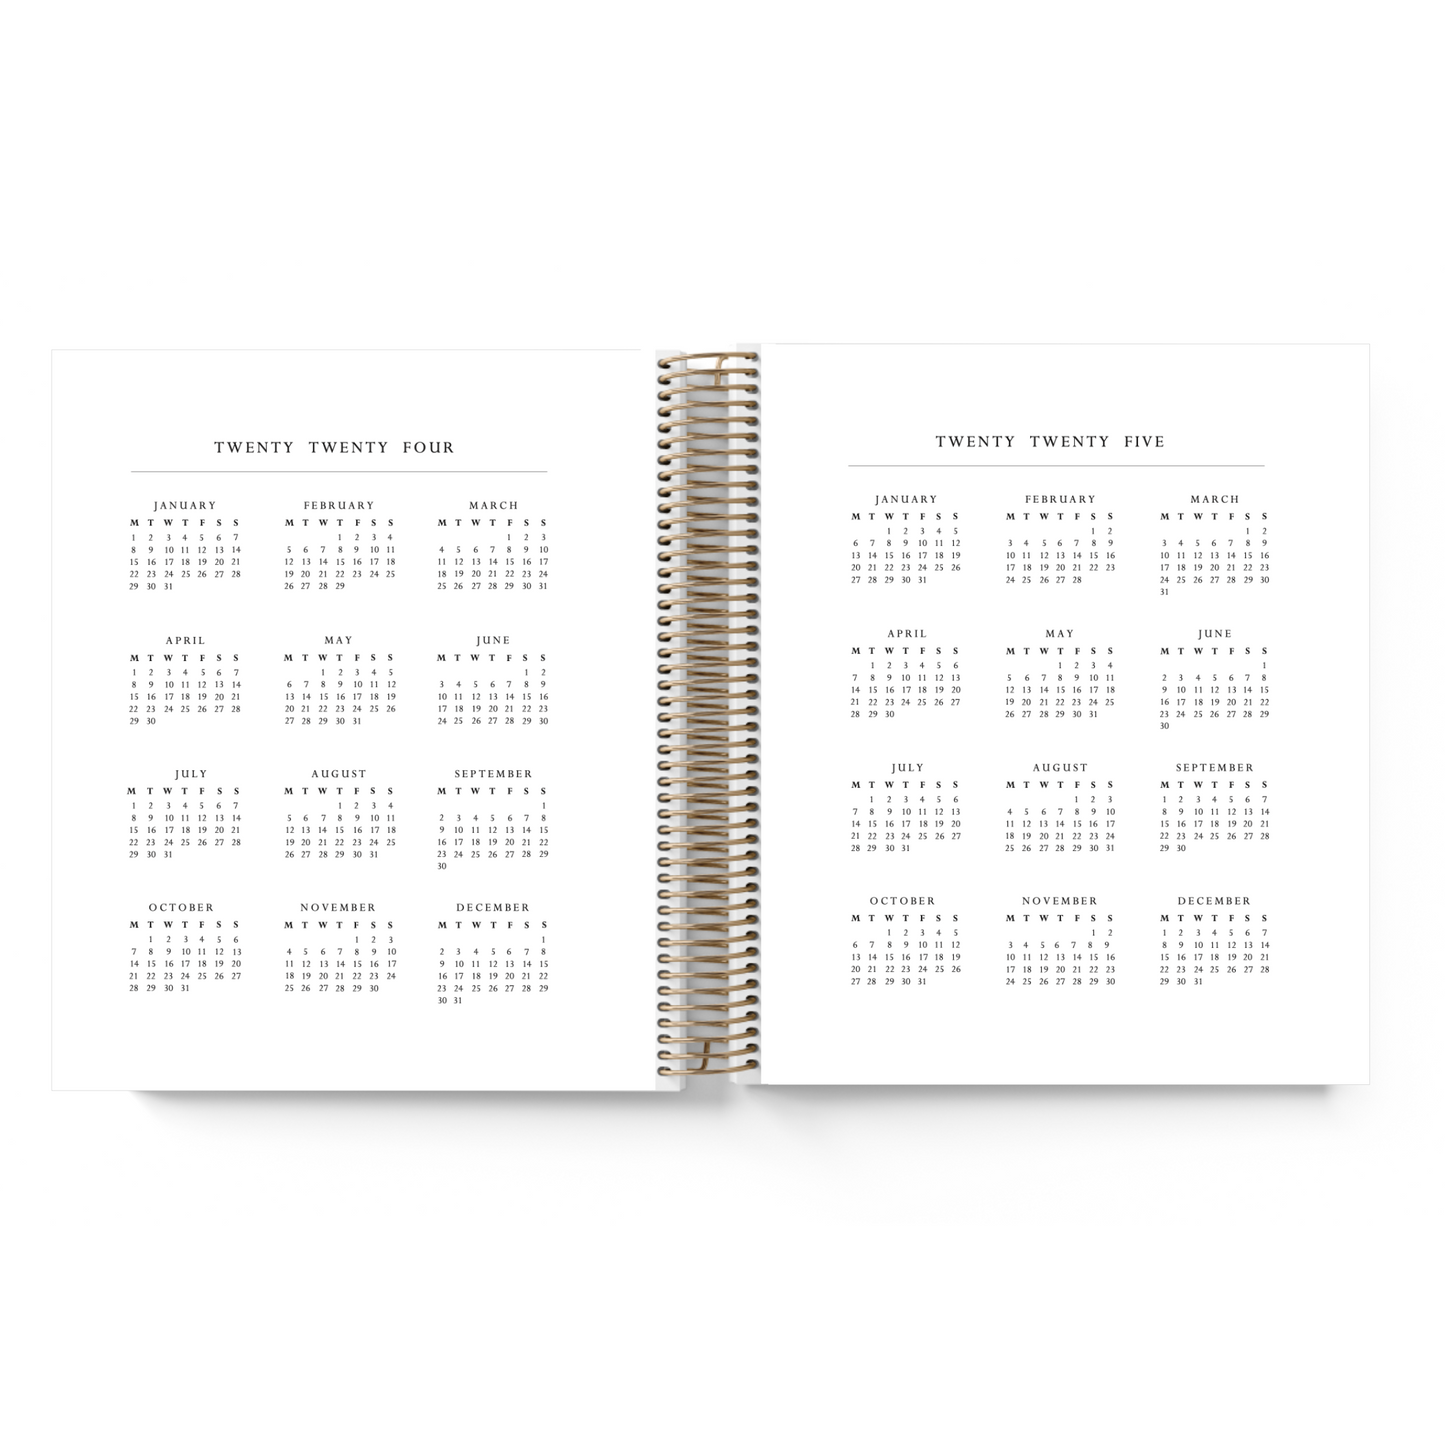 Bows (Foiled) || A5 Wide Horizontal Planner